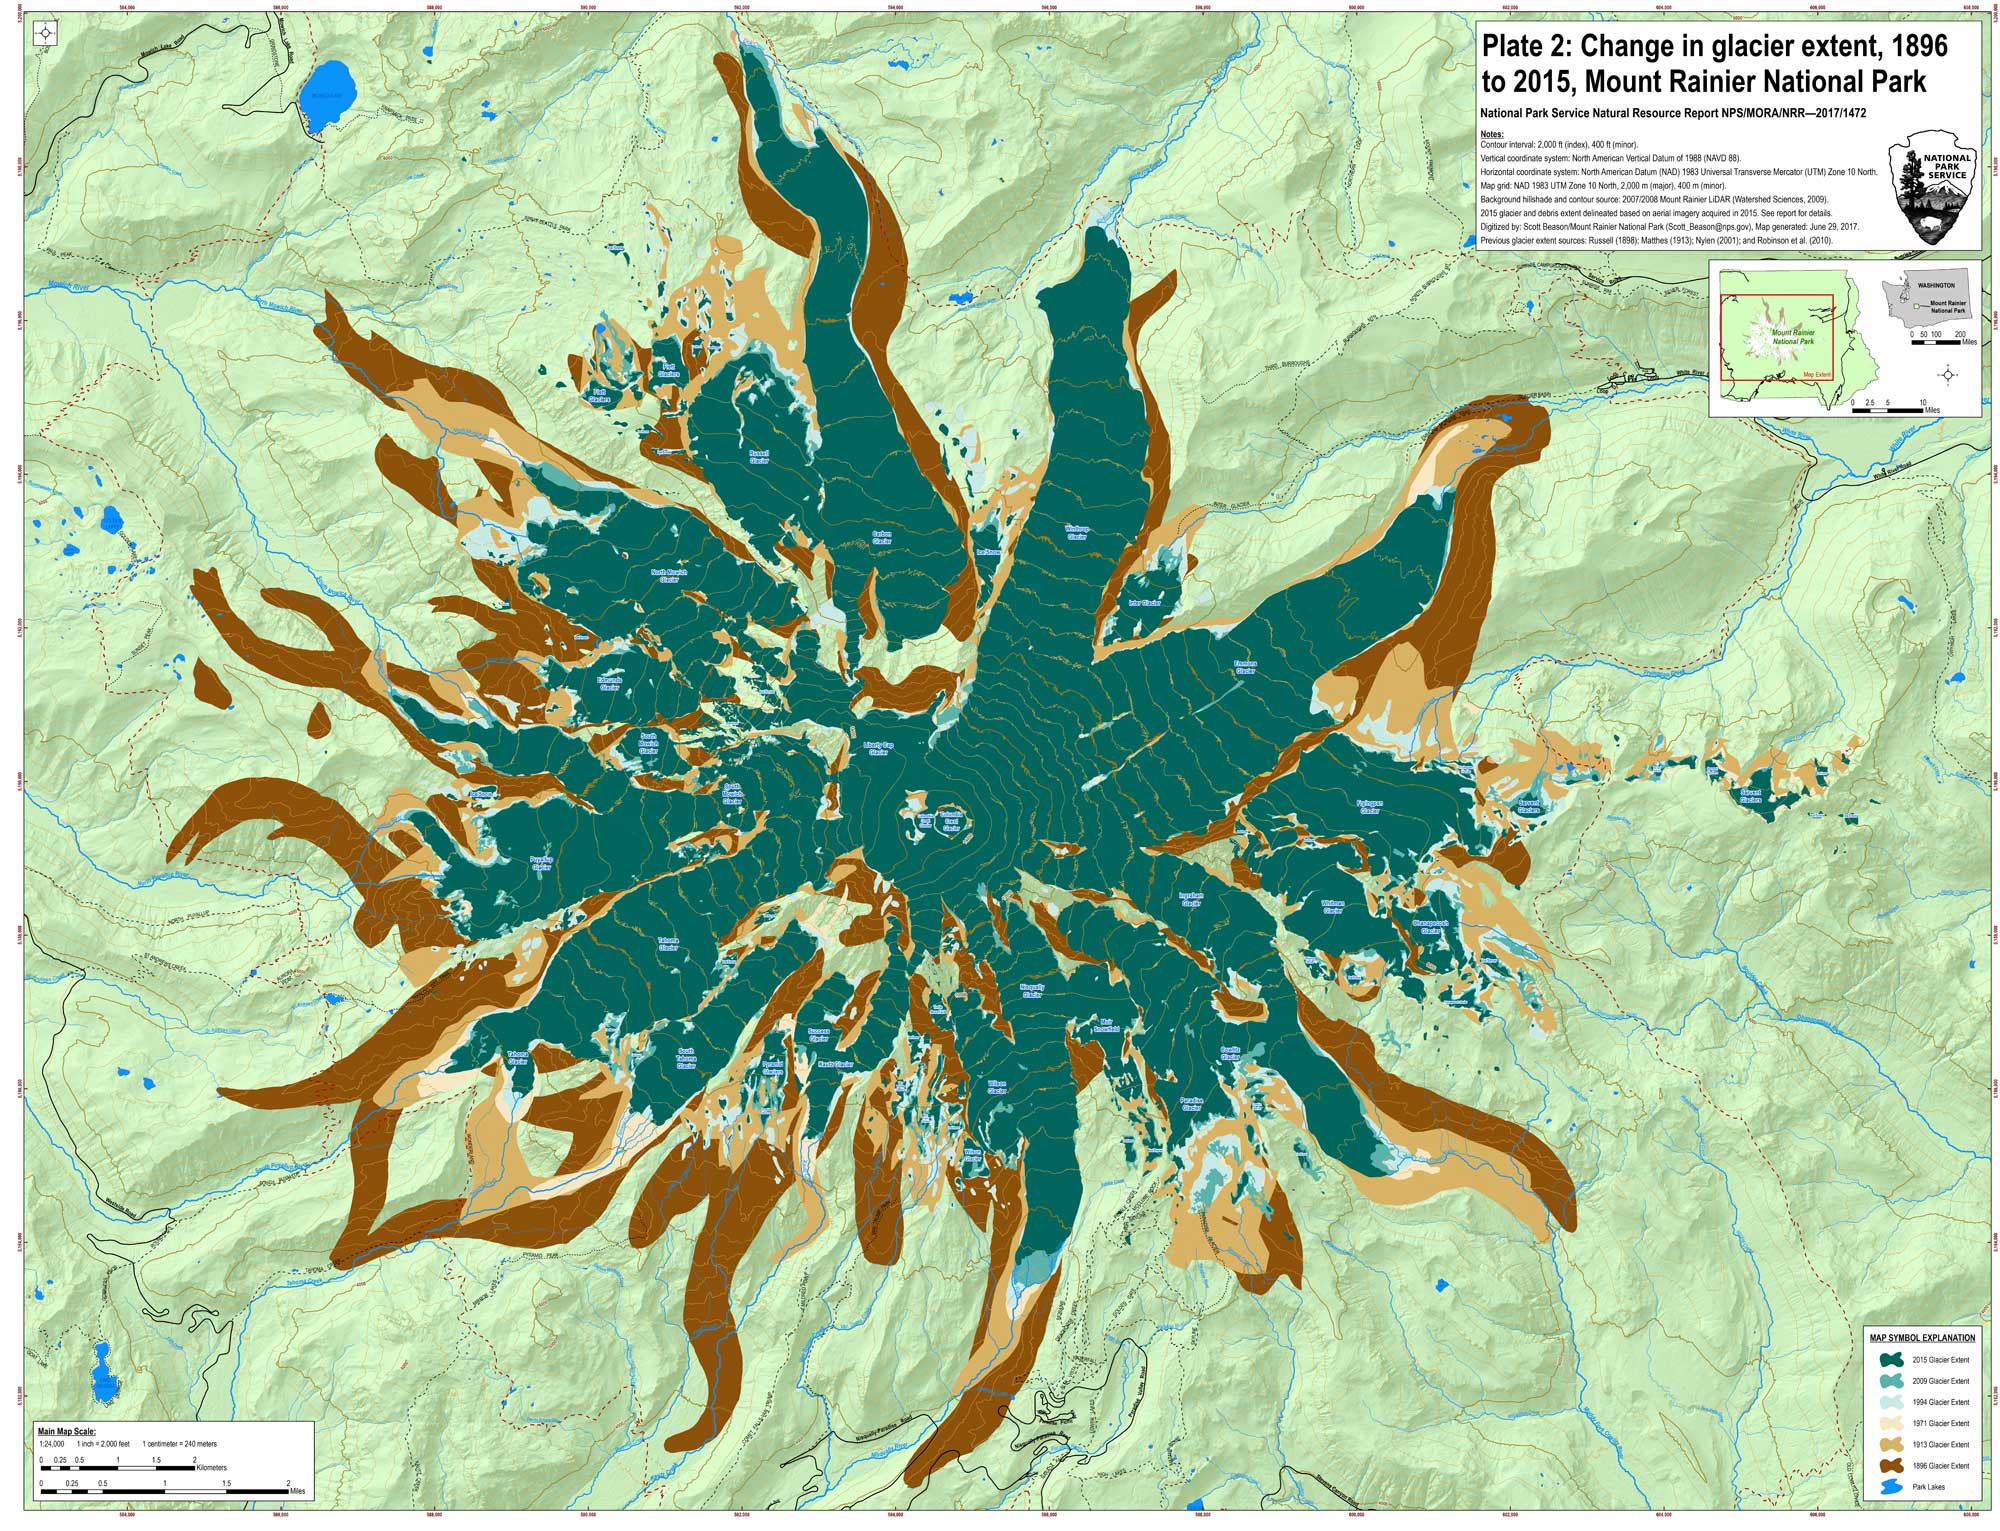 Topographic map of the peak of Mount Rainier showing the extent of its alpine glaciers at six points in time from 1896 to 2015. The glaciers were the longest in 1896 and have retreated substantially by 2015.